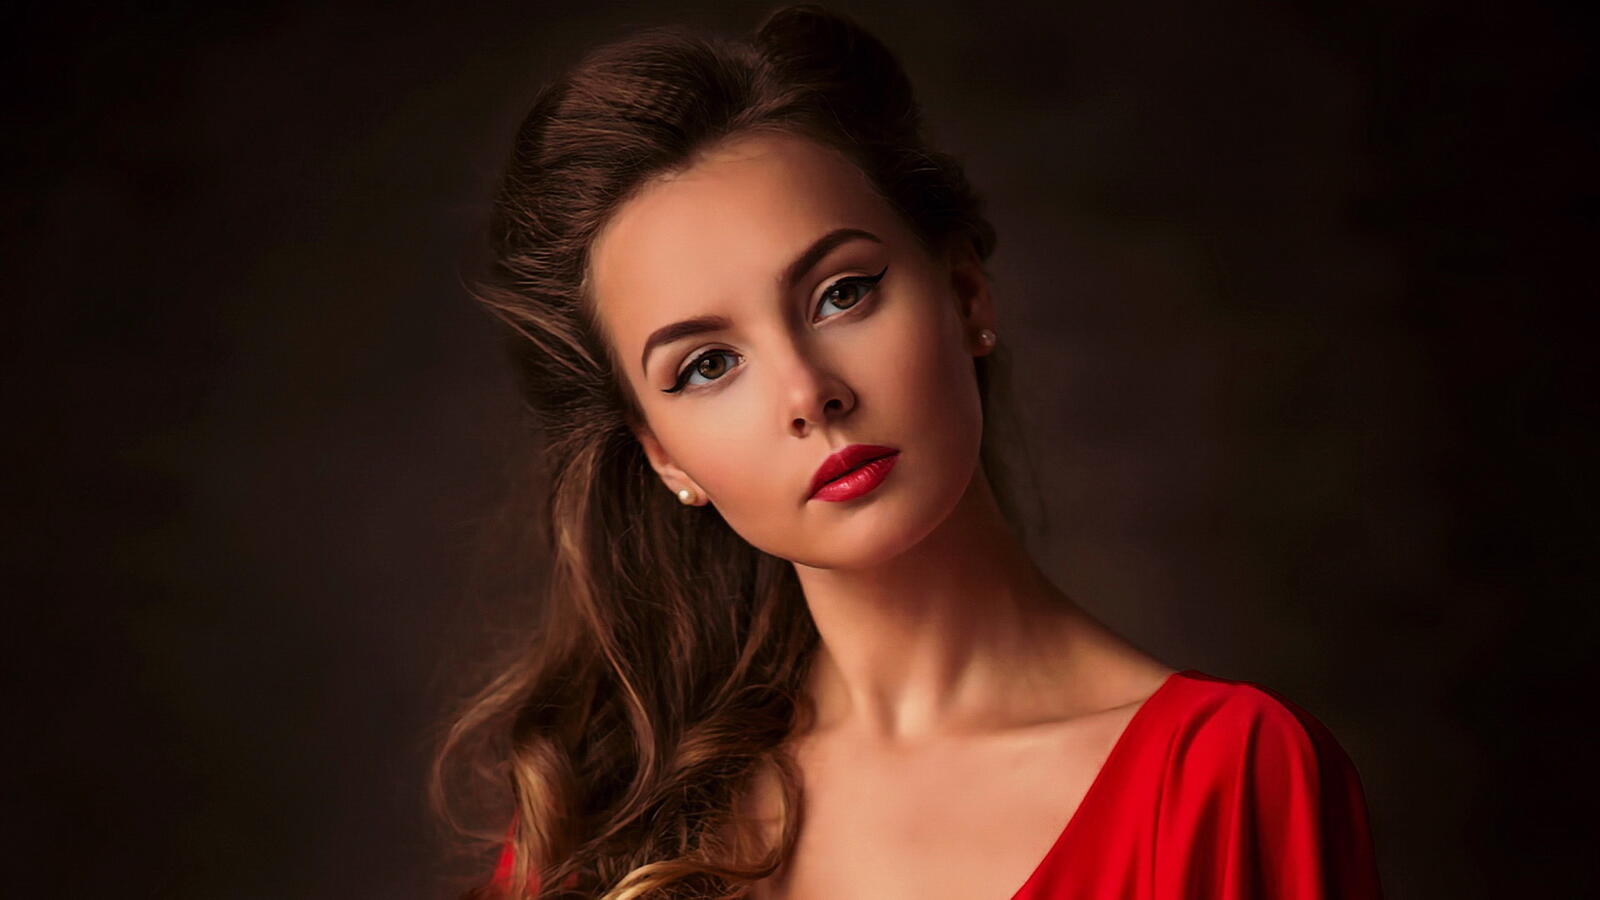 Free photo Portrait Girl in Red